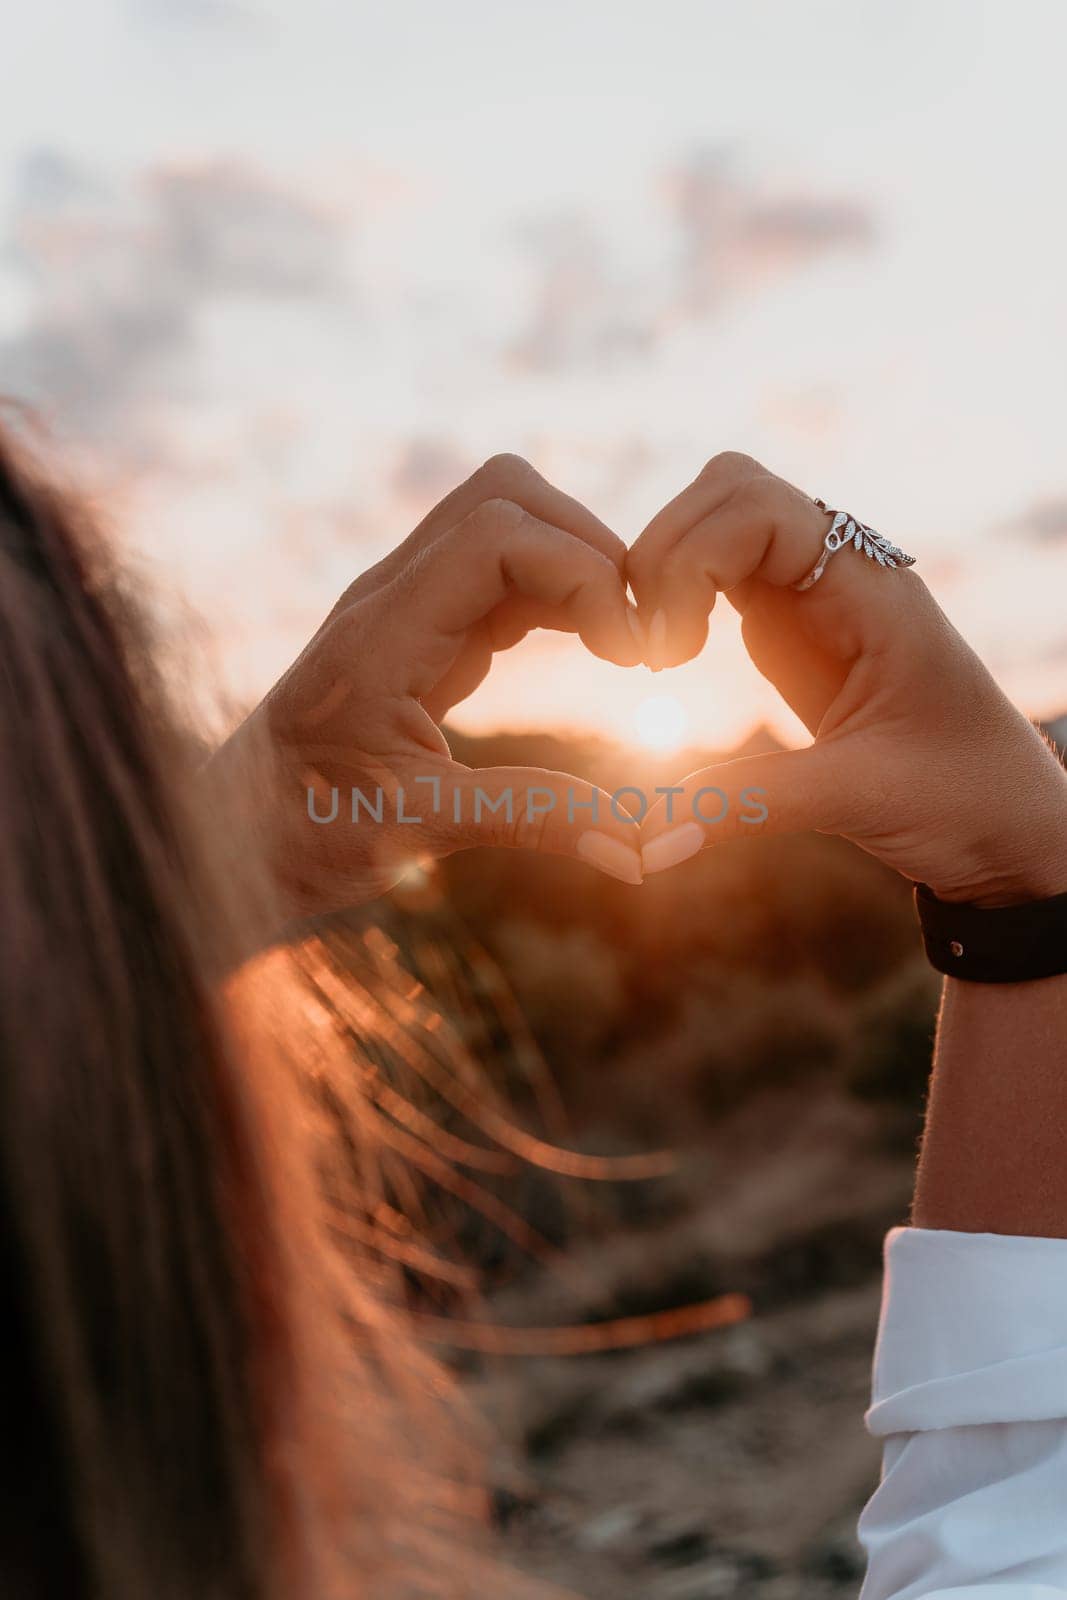 A woman's hand is holding a heart shape, with the sun shining on it. Concept of love and warmth, as the sun symbolizes happiness and positivity. The heart shape represents the bond between two people. by panophotograph